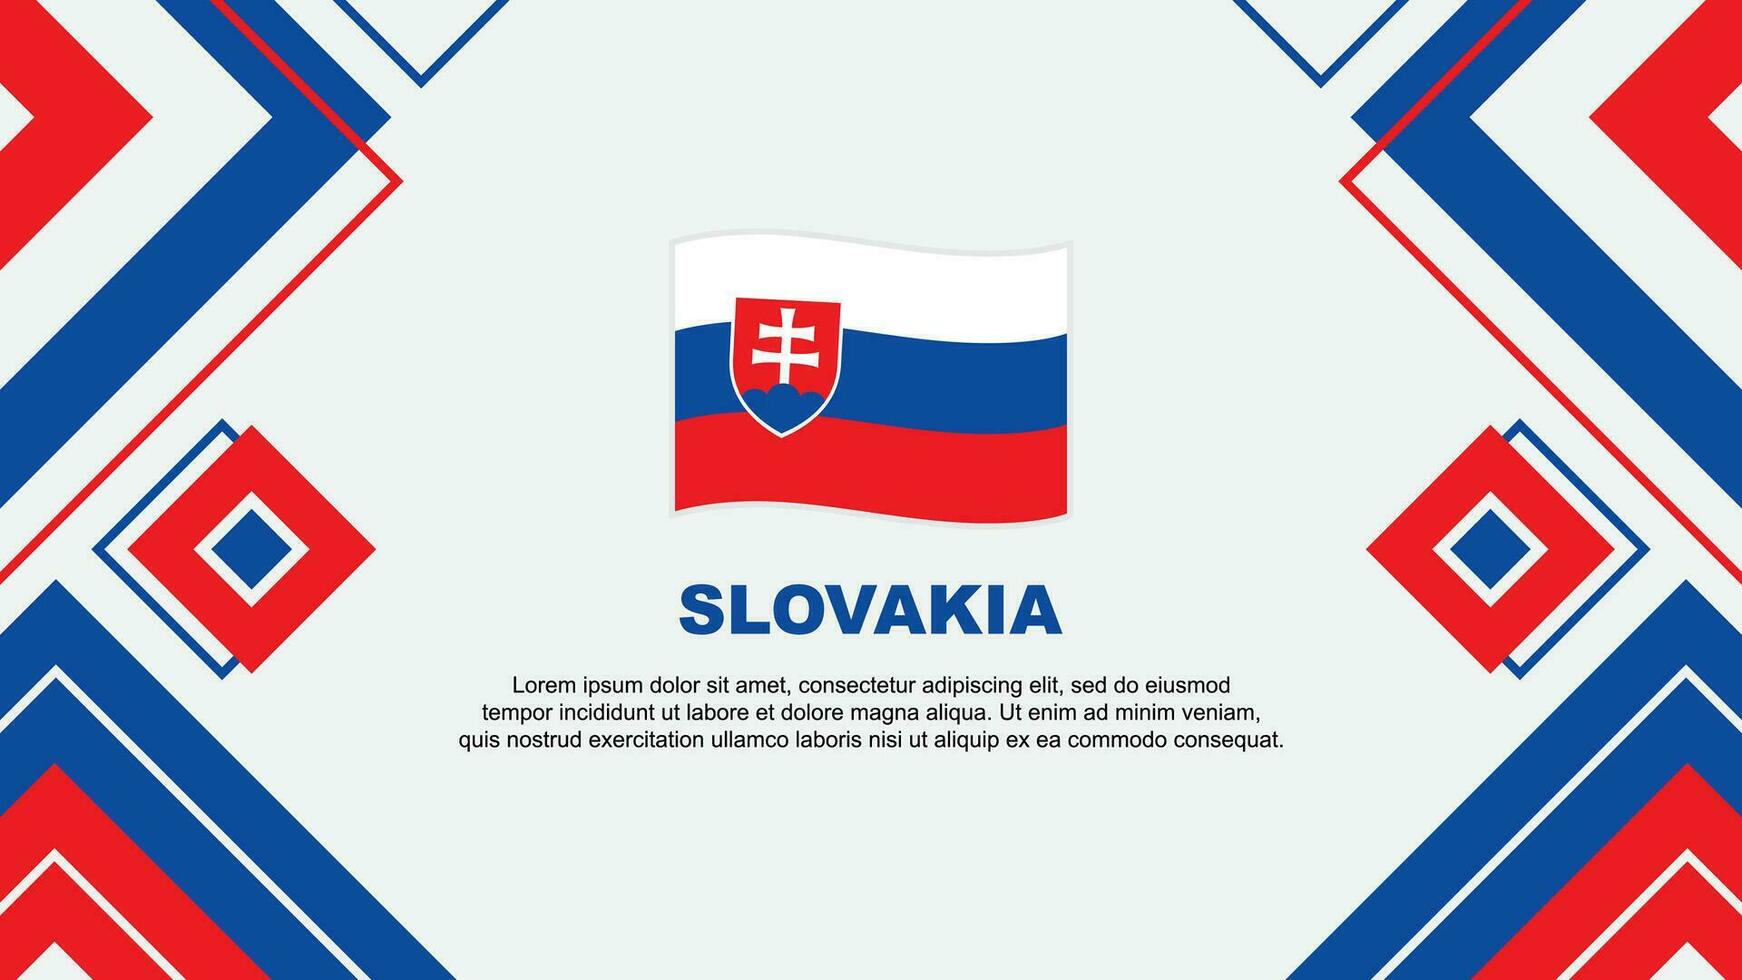 Slovakia Flag Abstract Background Design Template. Slovakia Independence Day Banner Wallpaper Vector Illustration. Slovakia Background